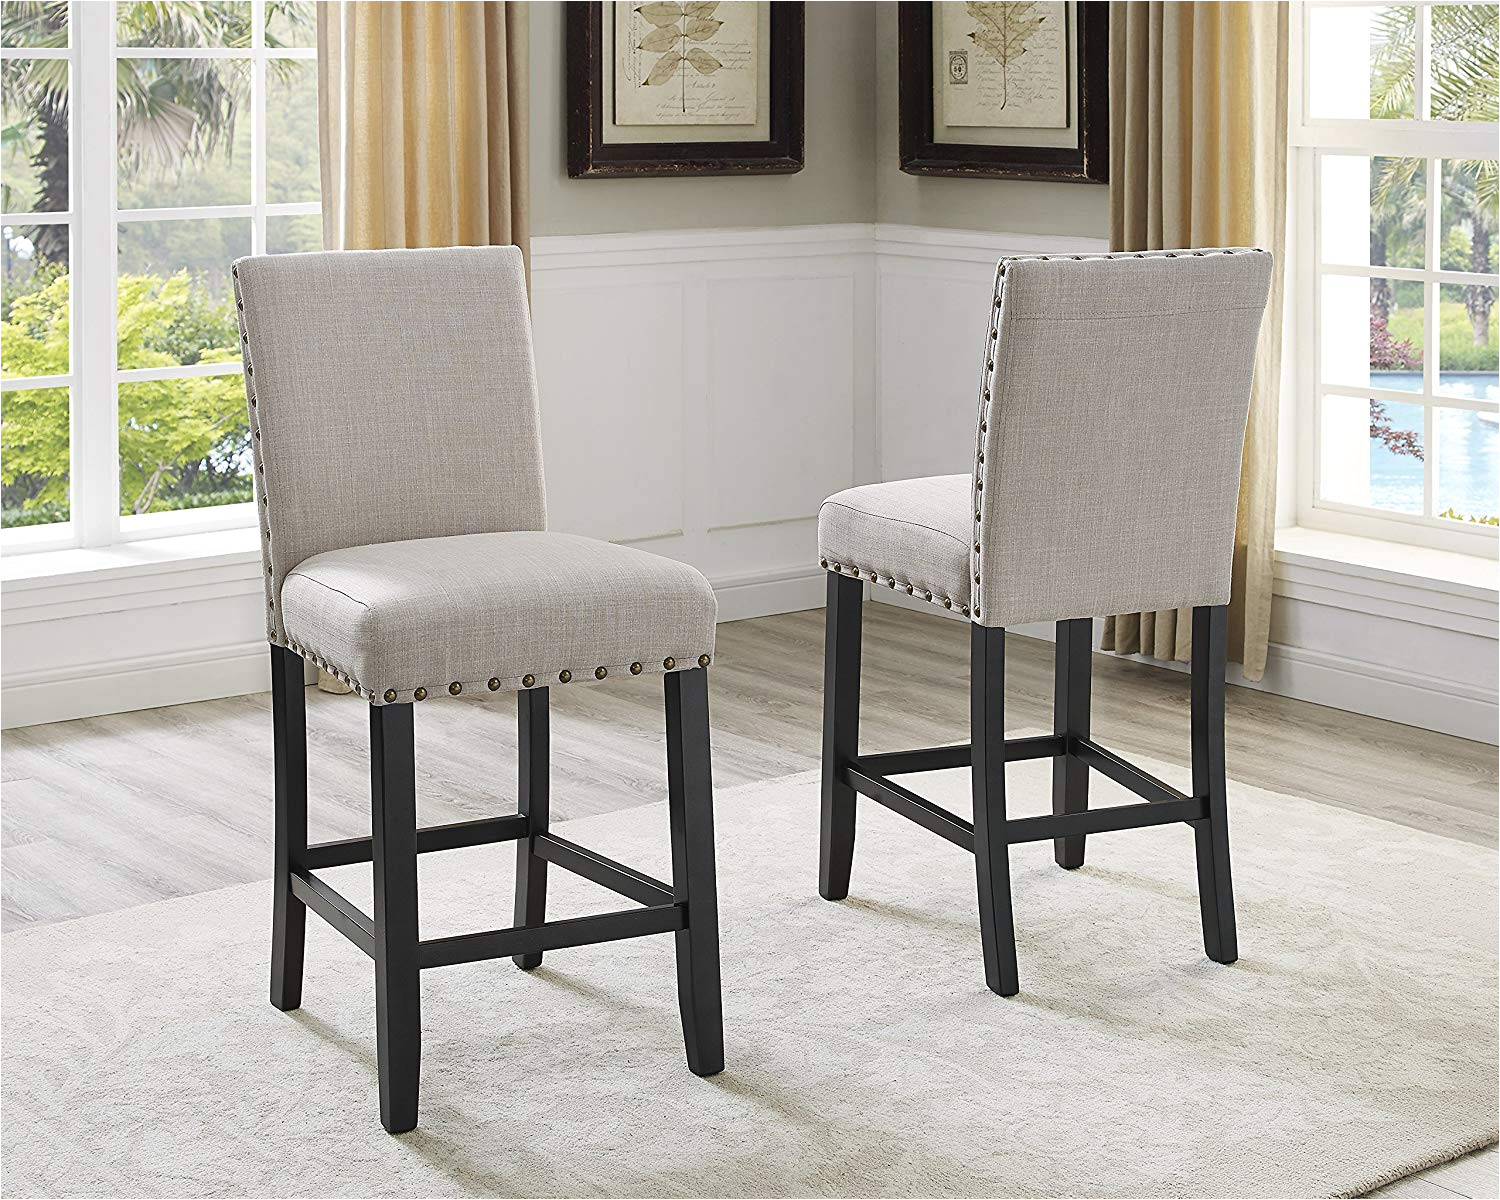 amazon com biony tan fabric counter height stools with nailhead trim set of 2 chairs